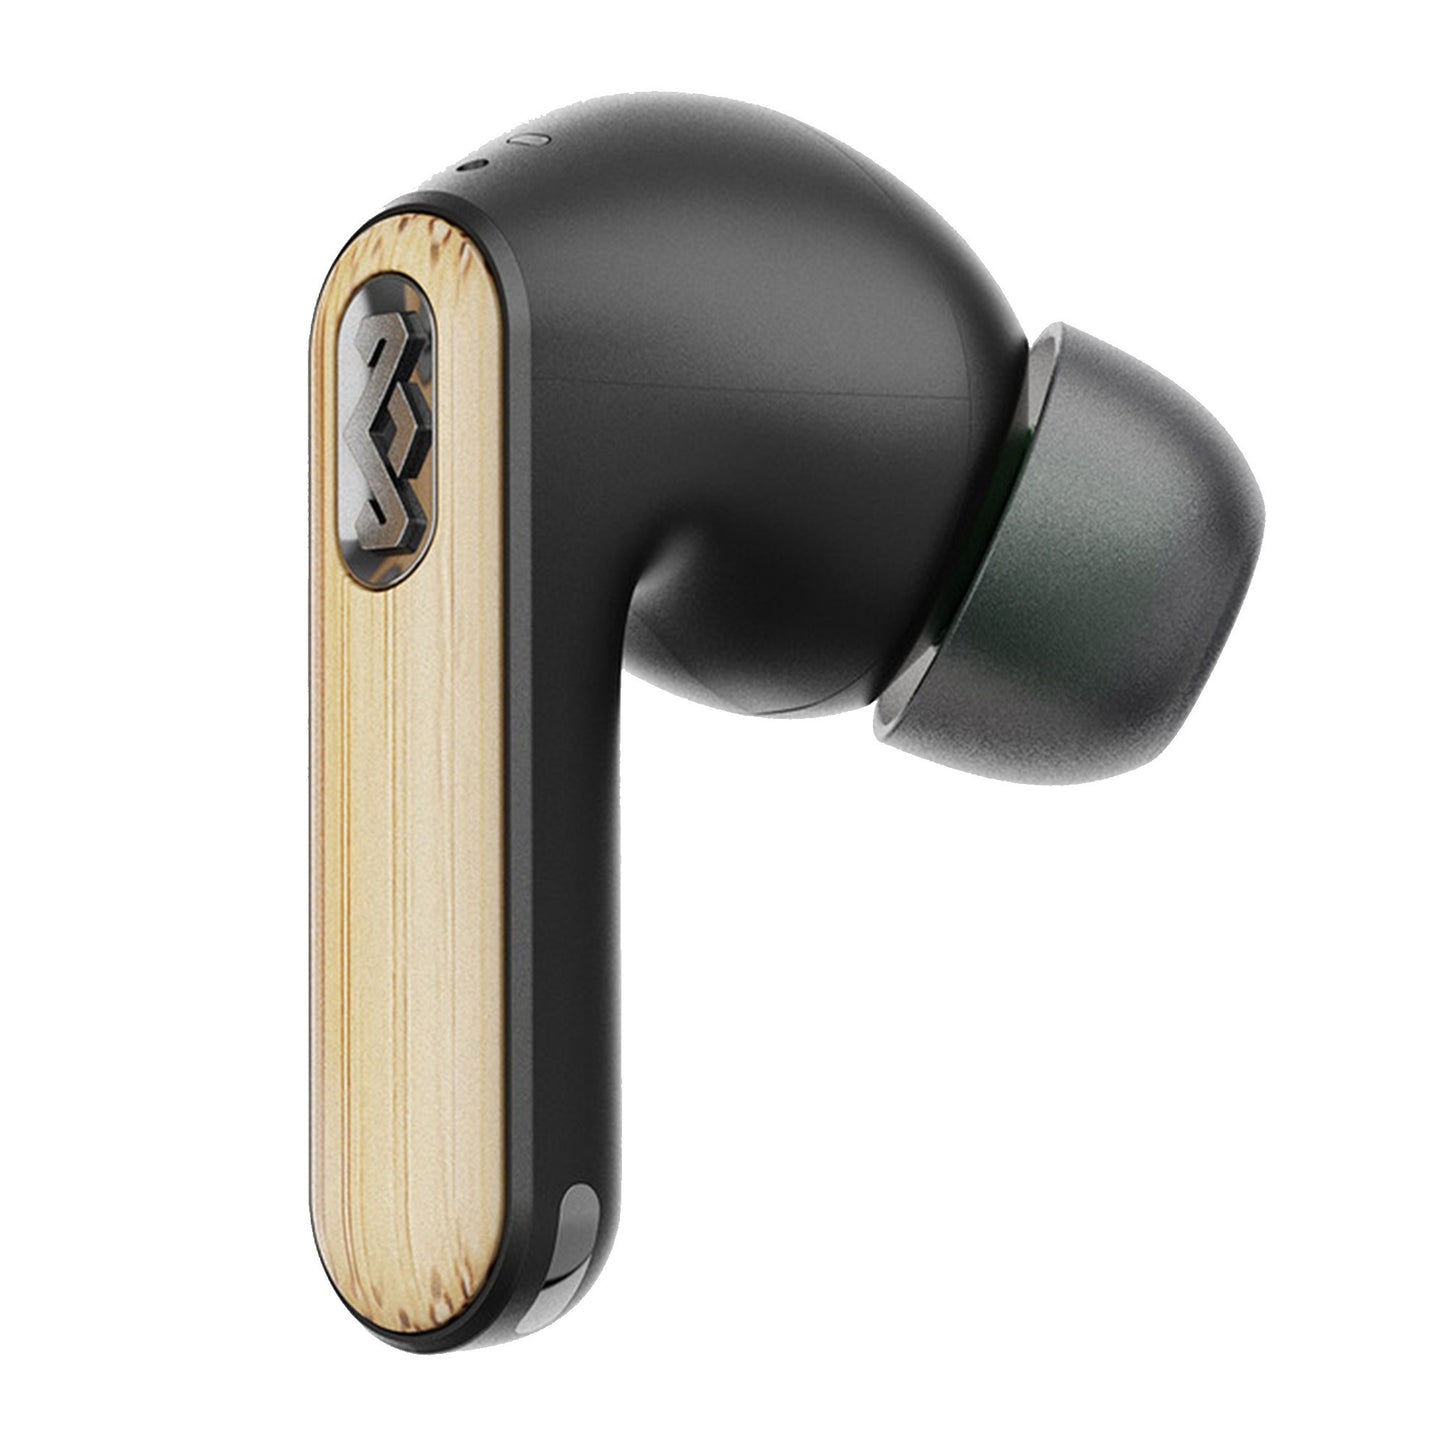 House of Marley Redemption ANC 2 True Wireless Earbuds - Black - 15-10775